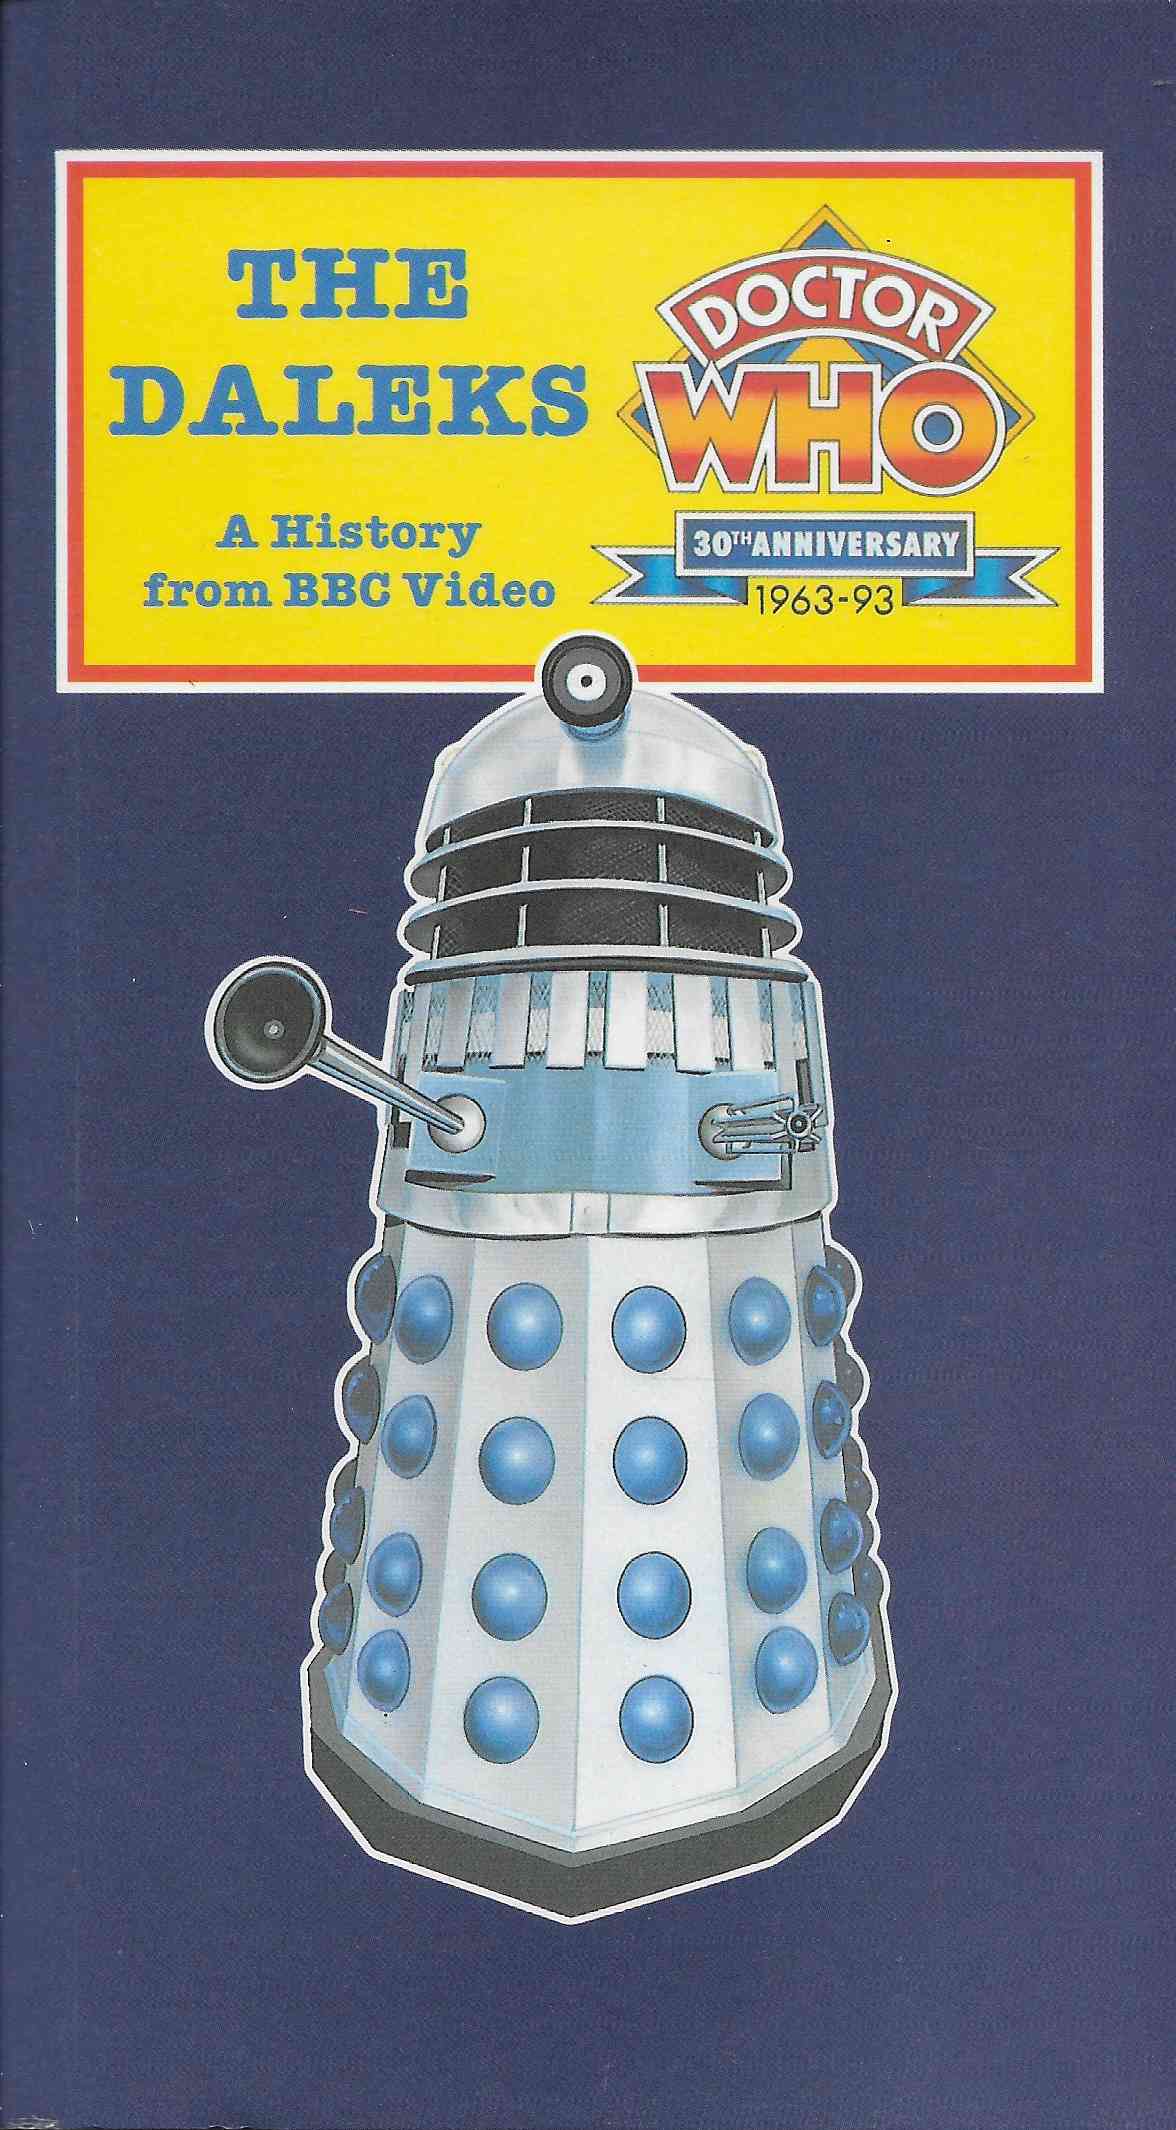 Picture of Books-BBCV-Daleks The Daleks - A history from BBC Video by artist Andrew Pixley / Michael McManus from the BBC books - Records and Tapes library